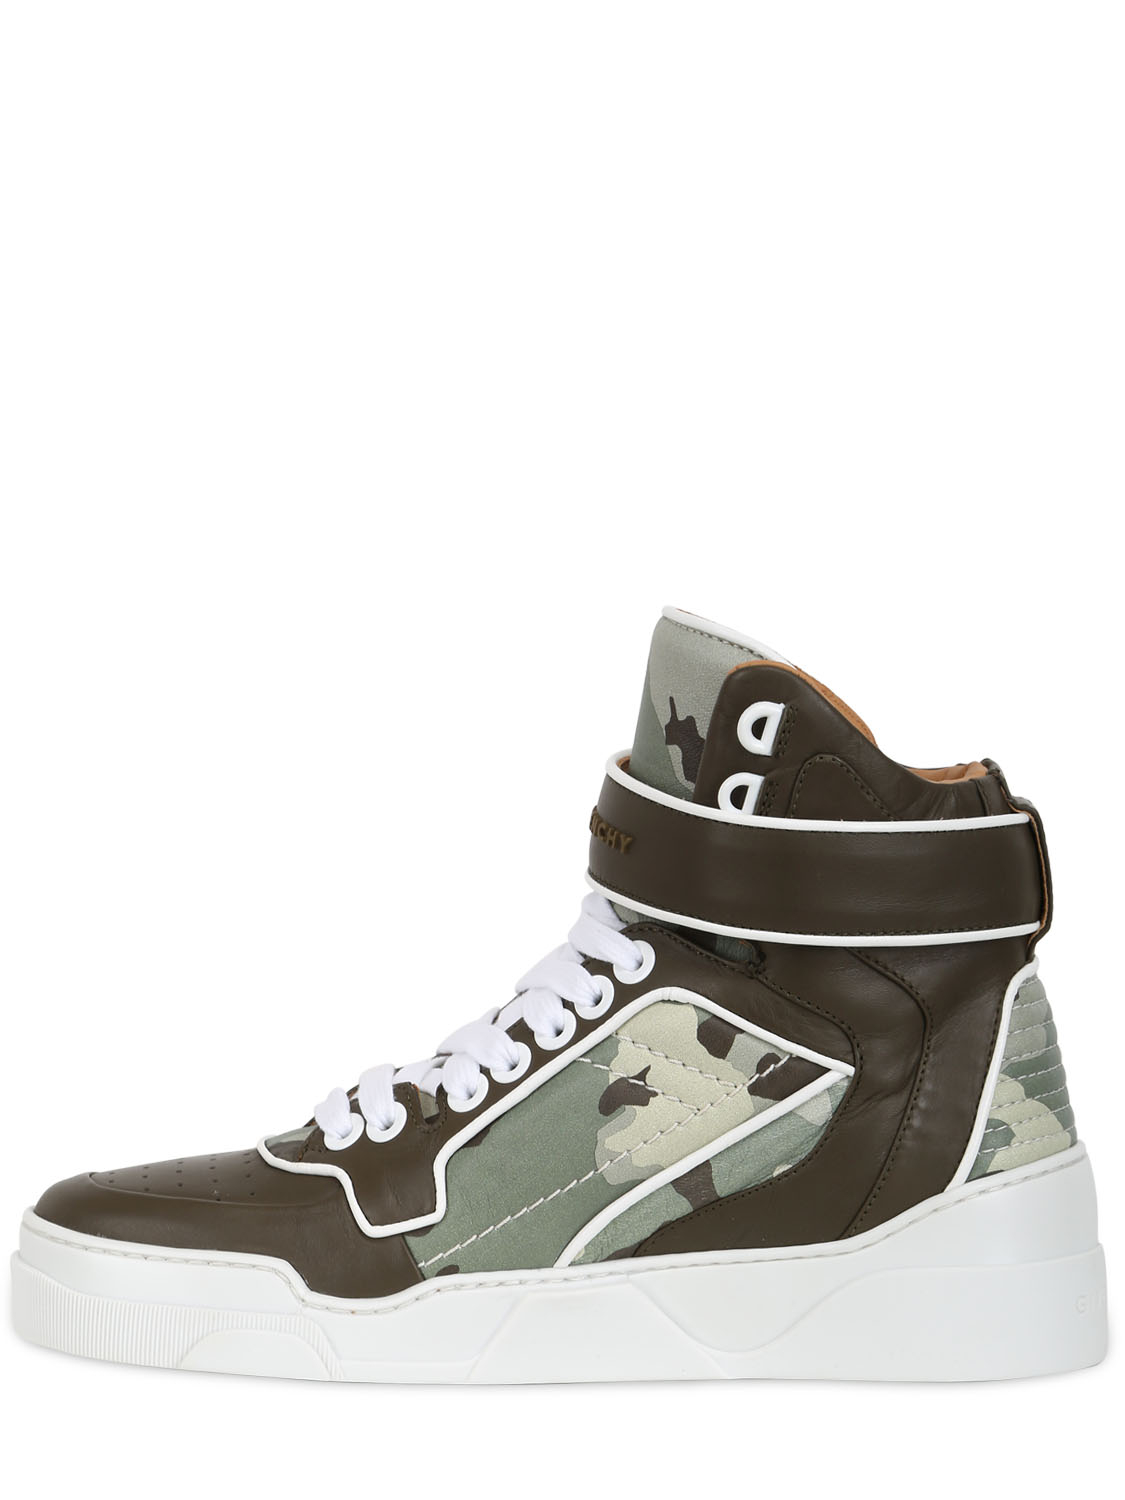 Lyst - Givenchy Camo Suede Leather High Top Sneakers in Brown for Men